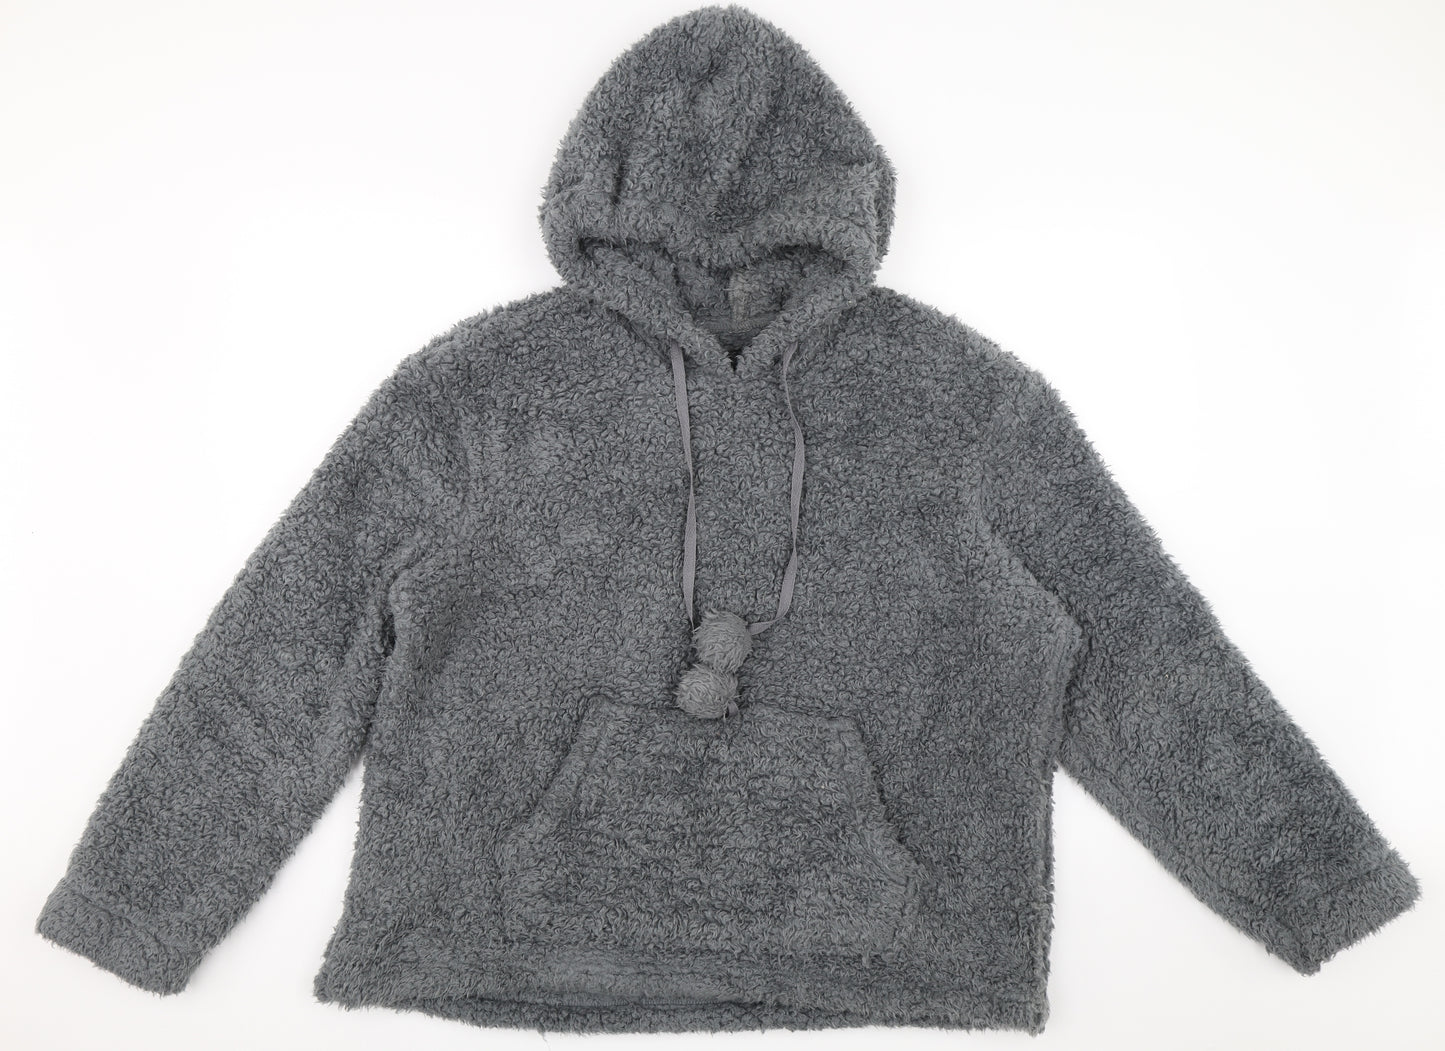 Dunelm Womens Grey   Pullover Hoodie Size L